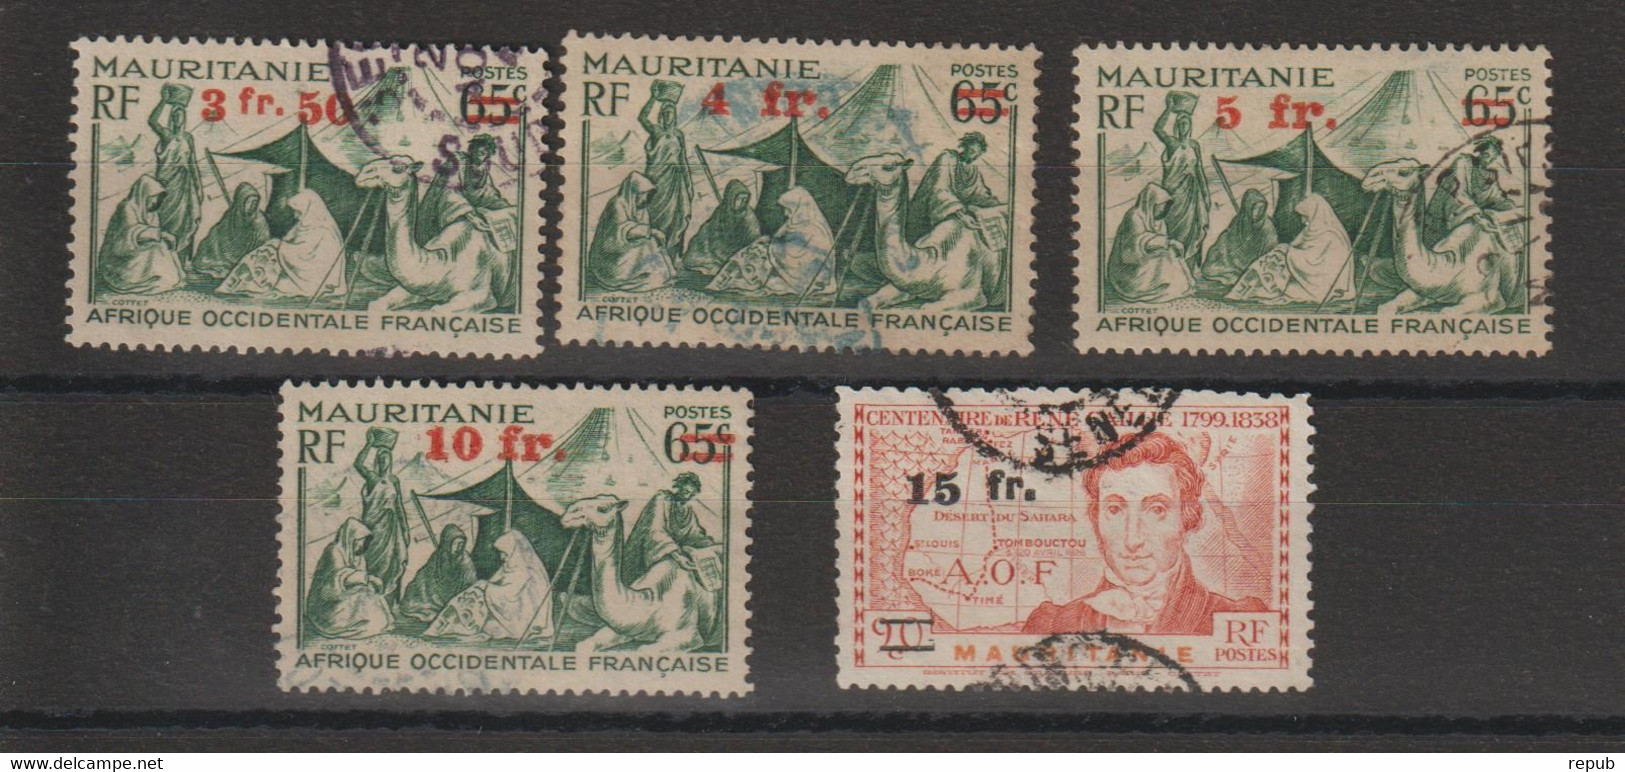 Mauritanie 1944 Série Courante Surchargée 133-37 5 Val Oblit. Used - Used Stamps